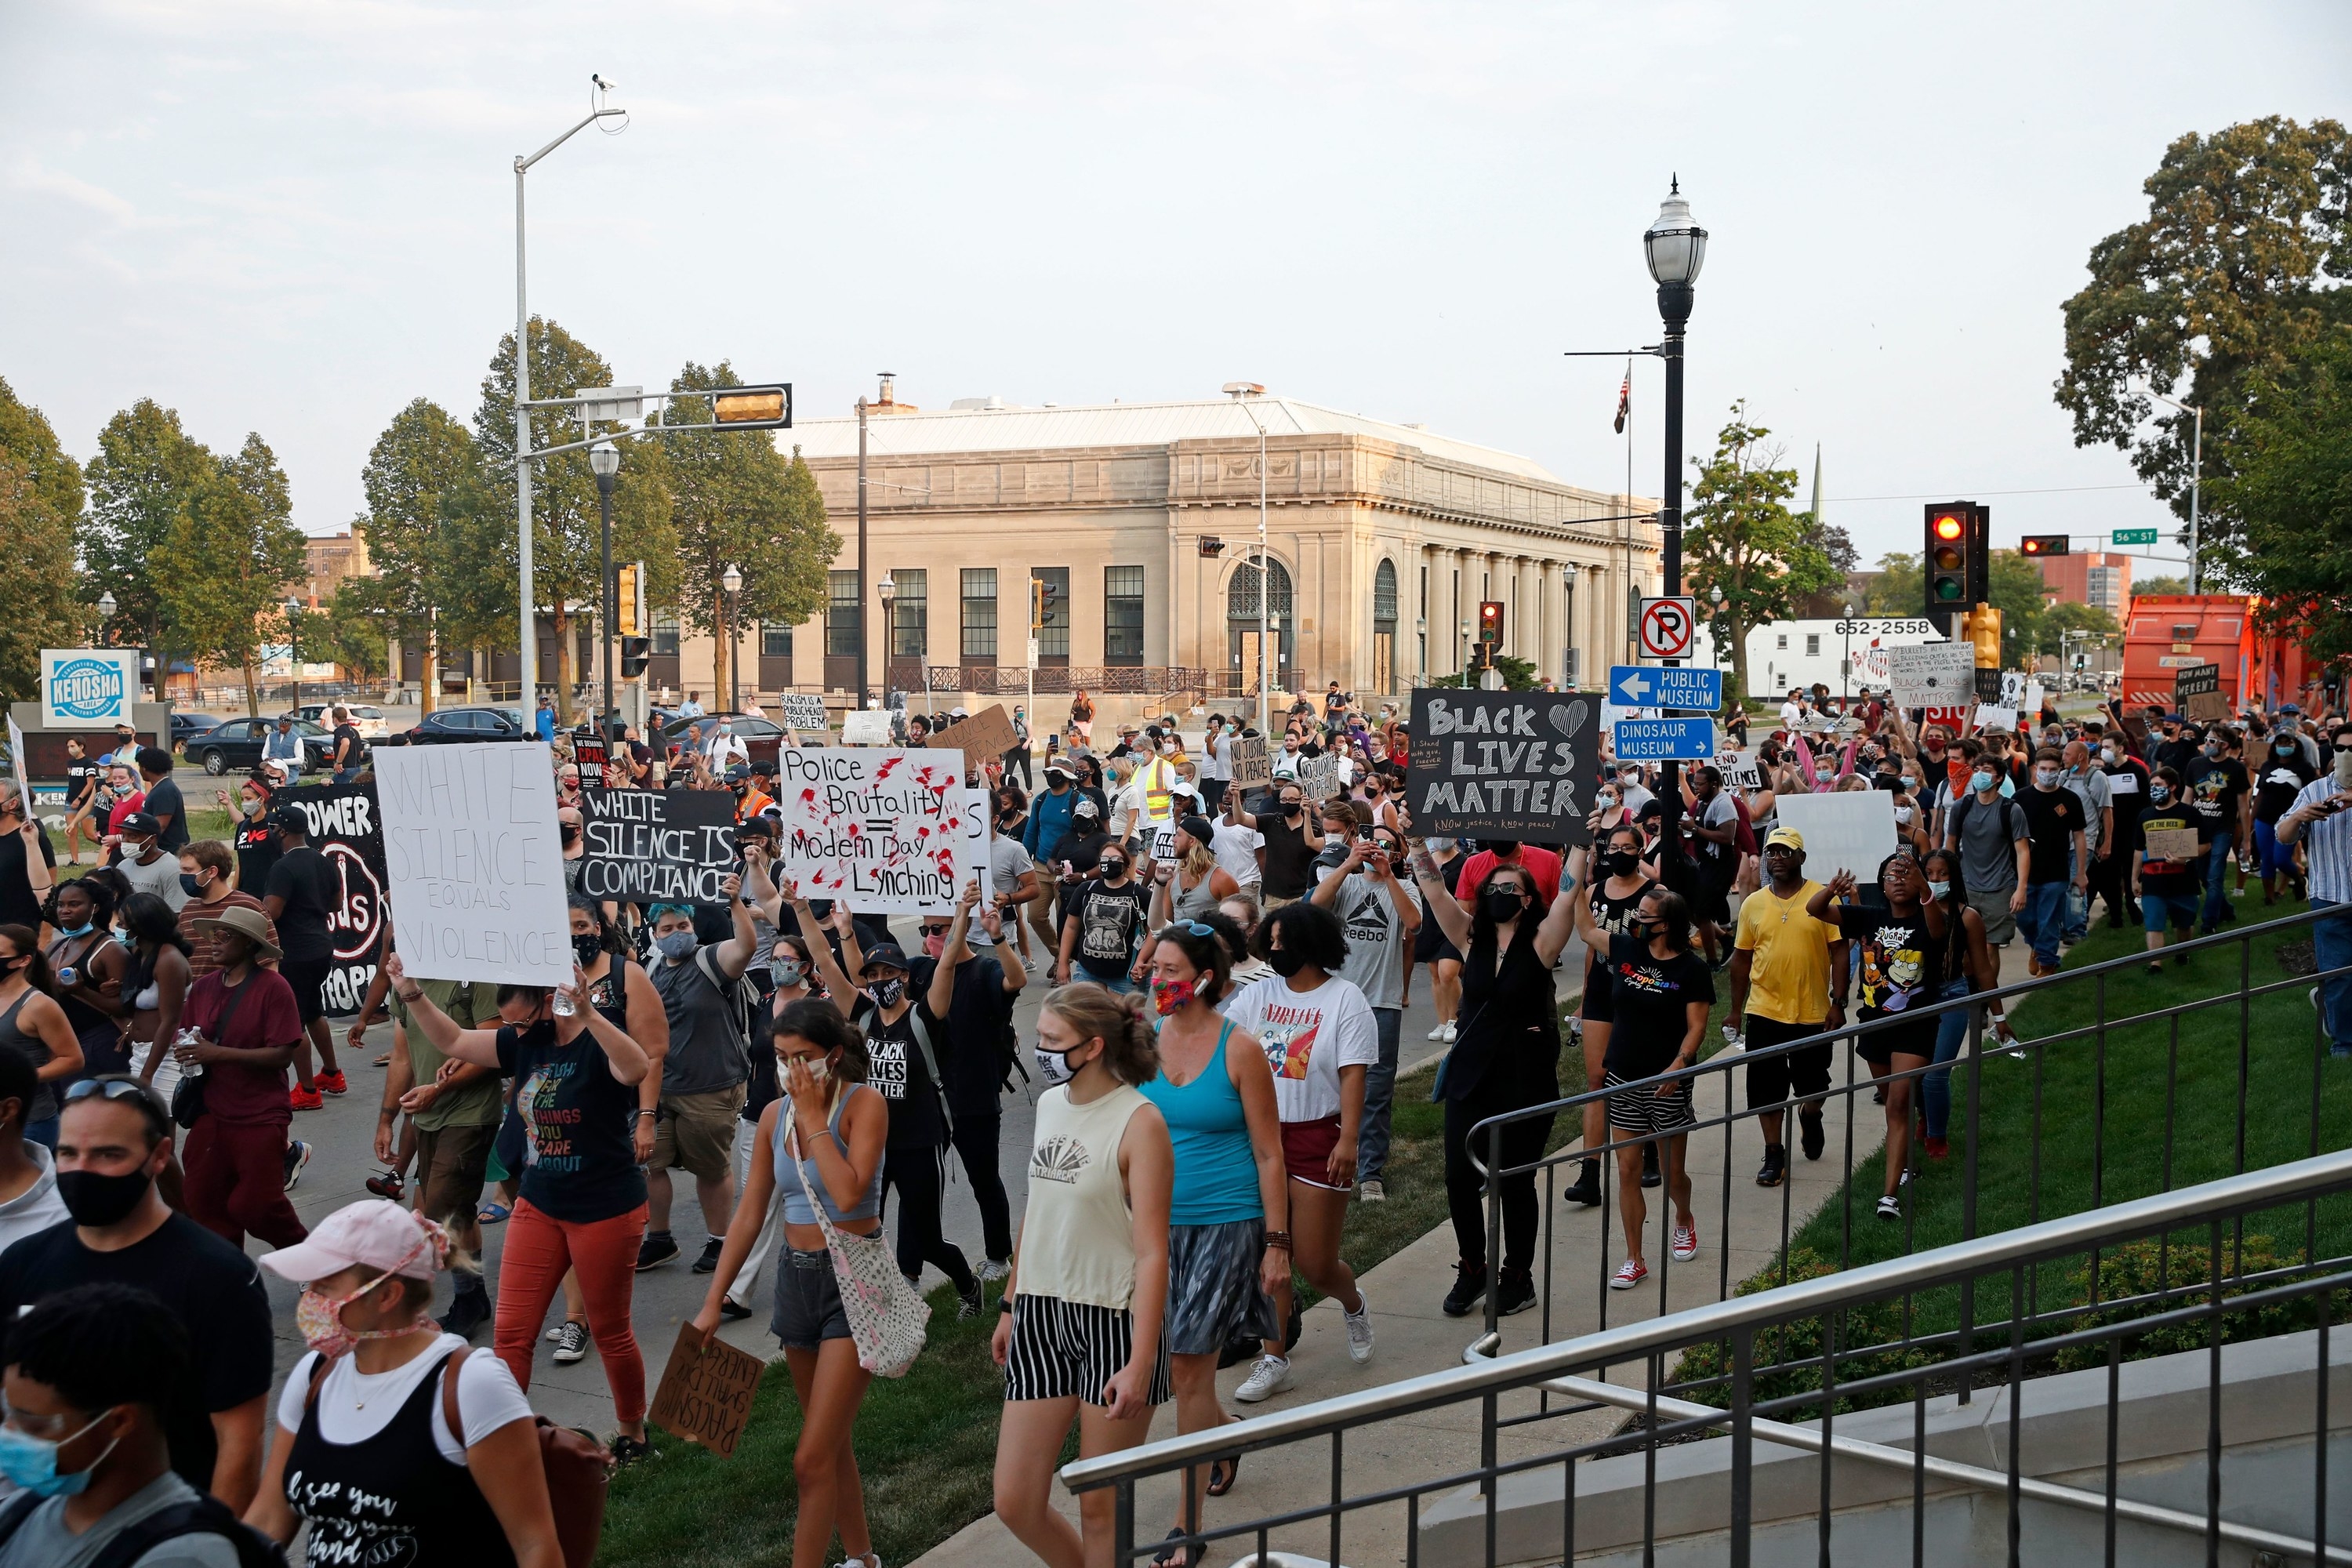 A large crowd of people walk down the street in the afternoon with signs